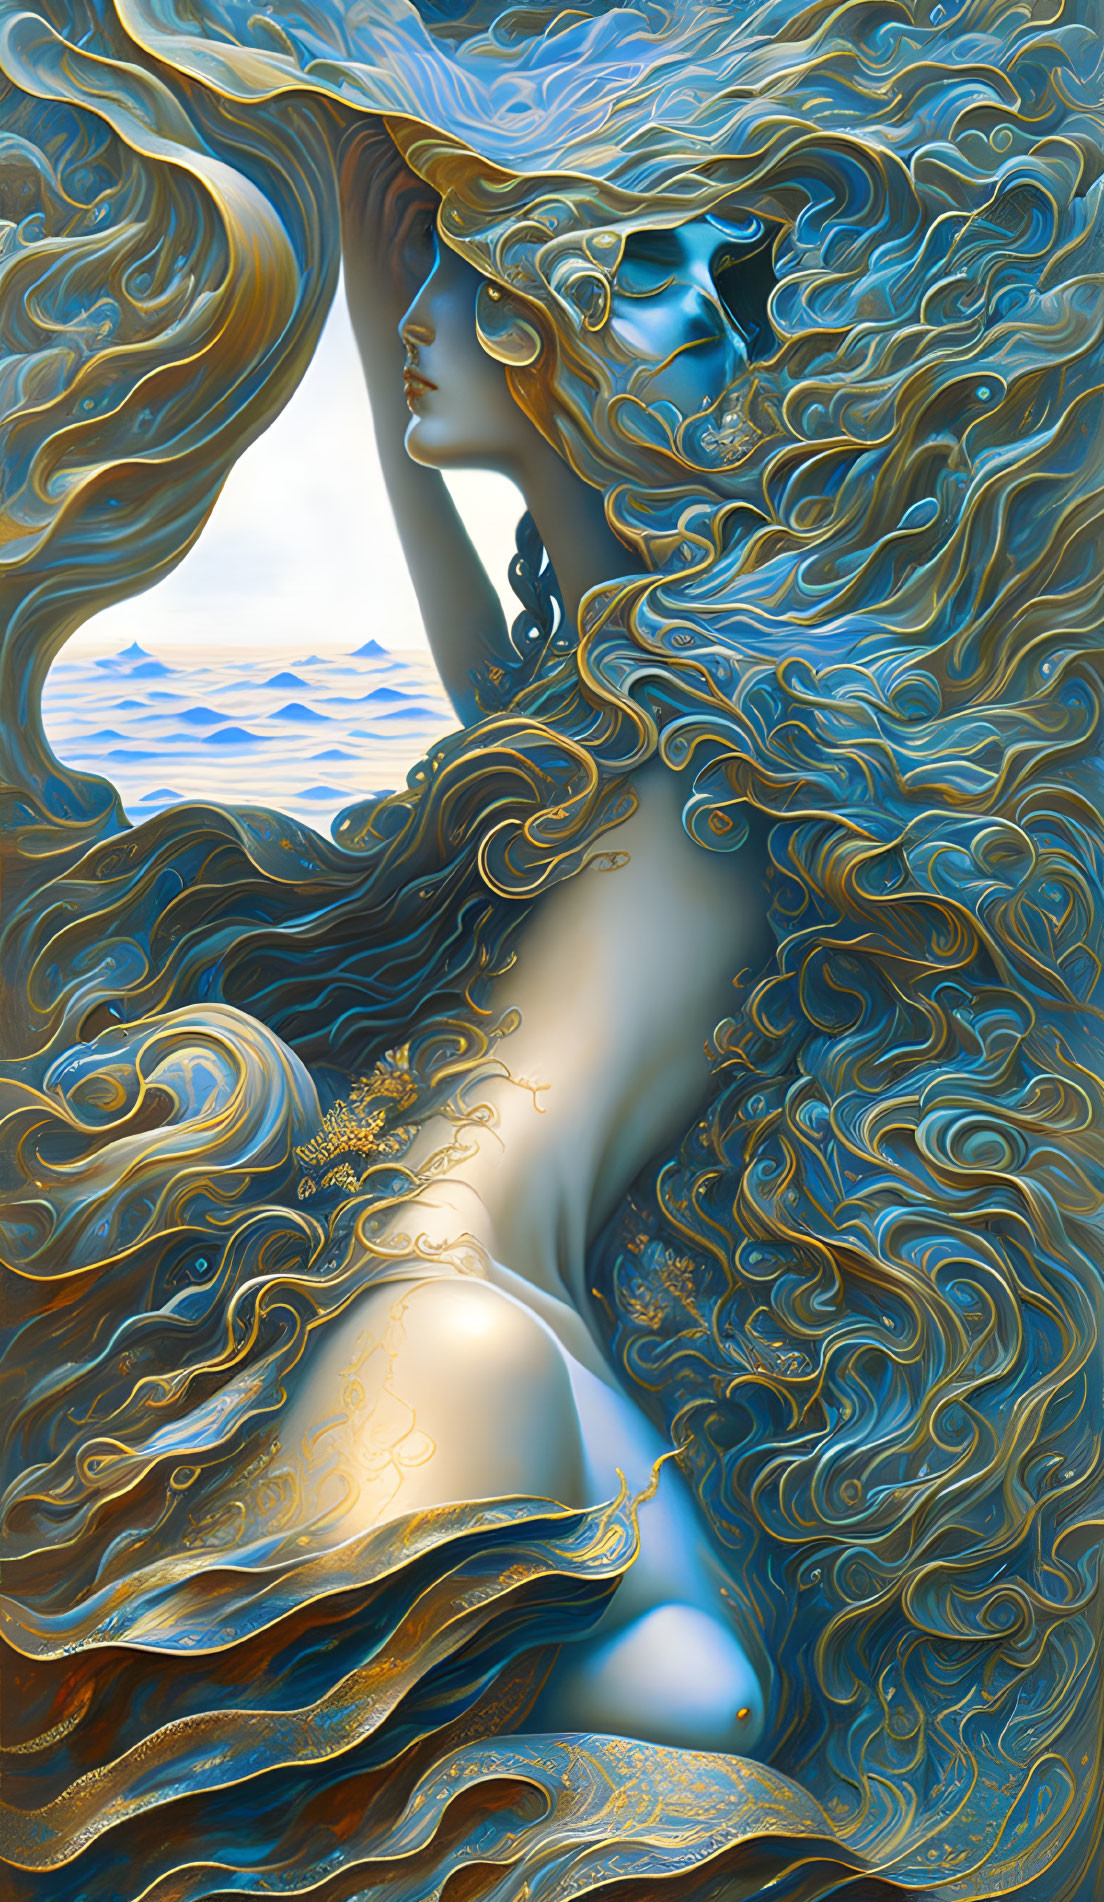 Female Figure with Golden Hair Merging with Ocean Waves in Blue Sea Background